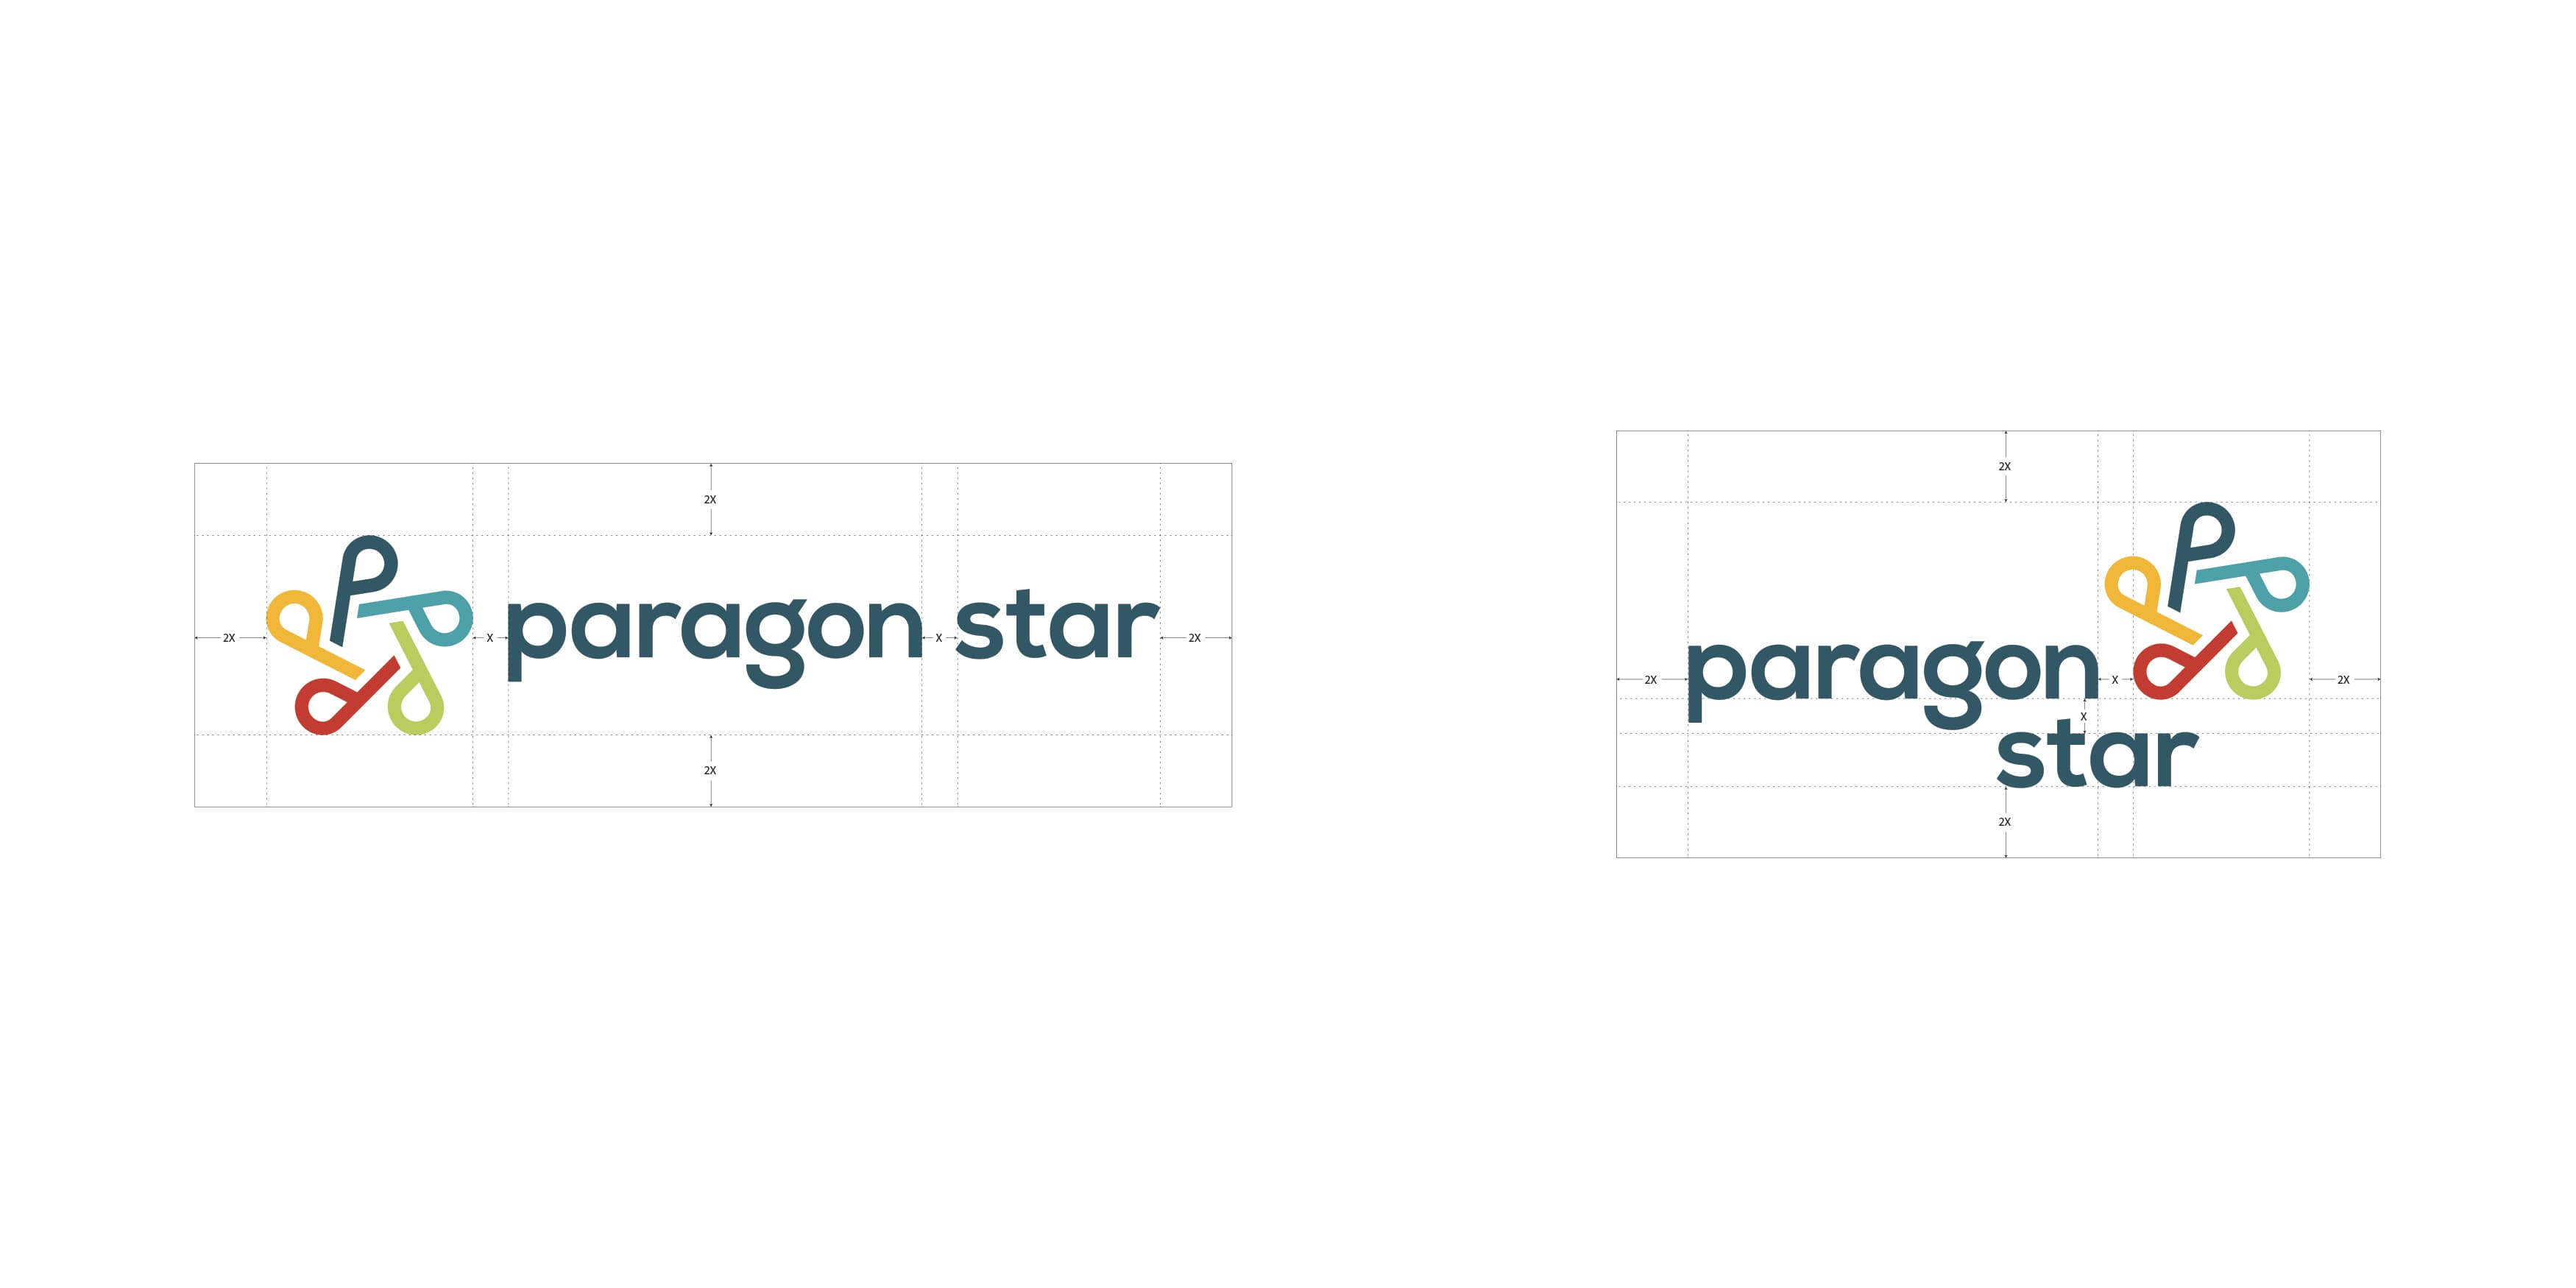 Paragon Star logo size guidelines. Logo it and guidelines for Paragon Star Branding.